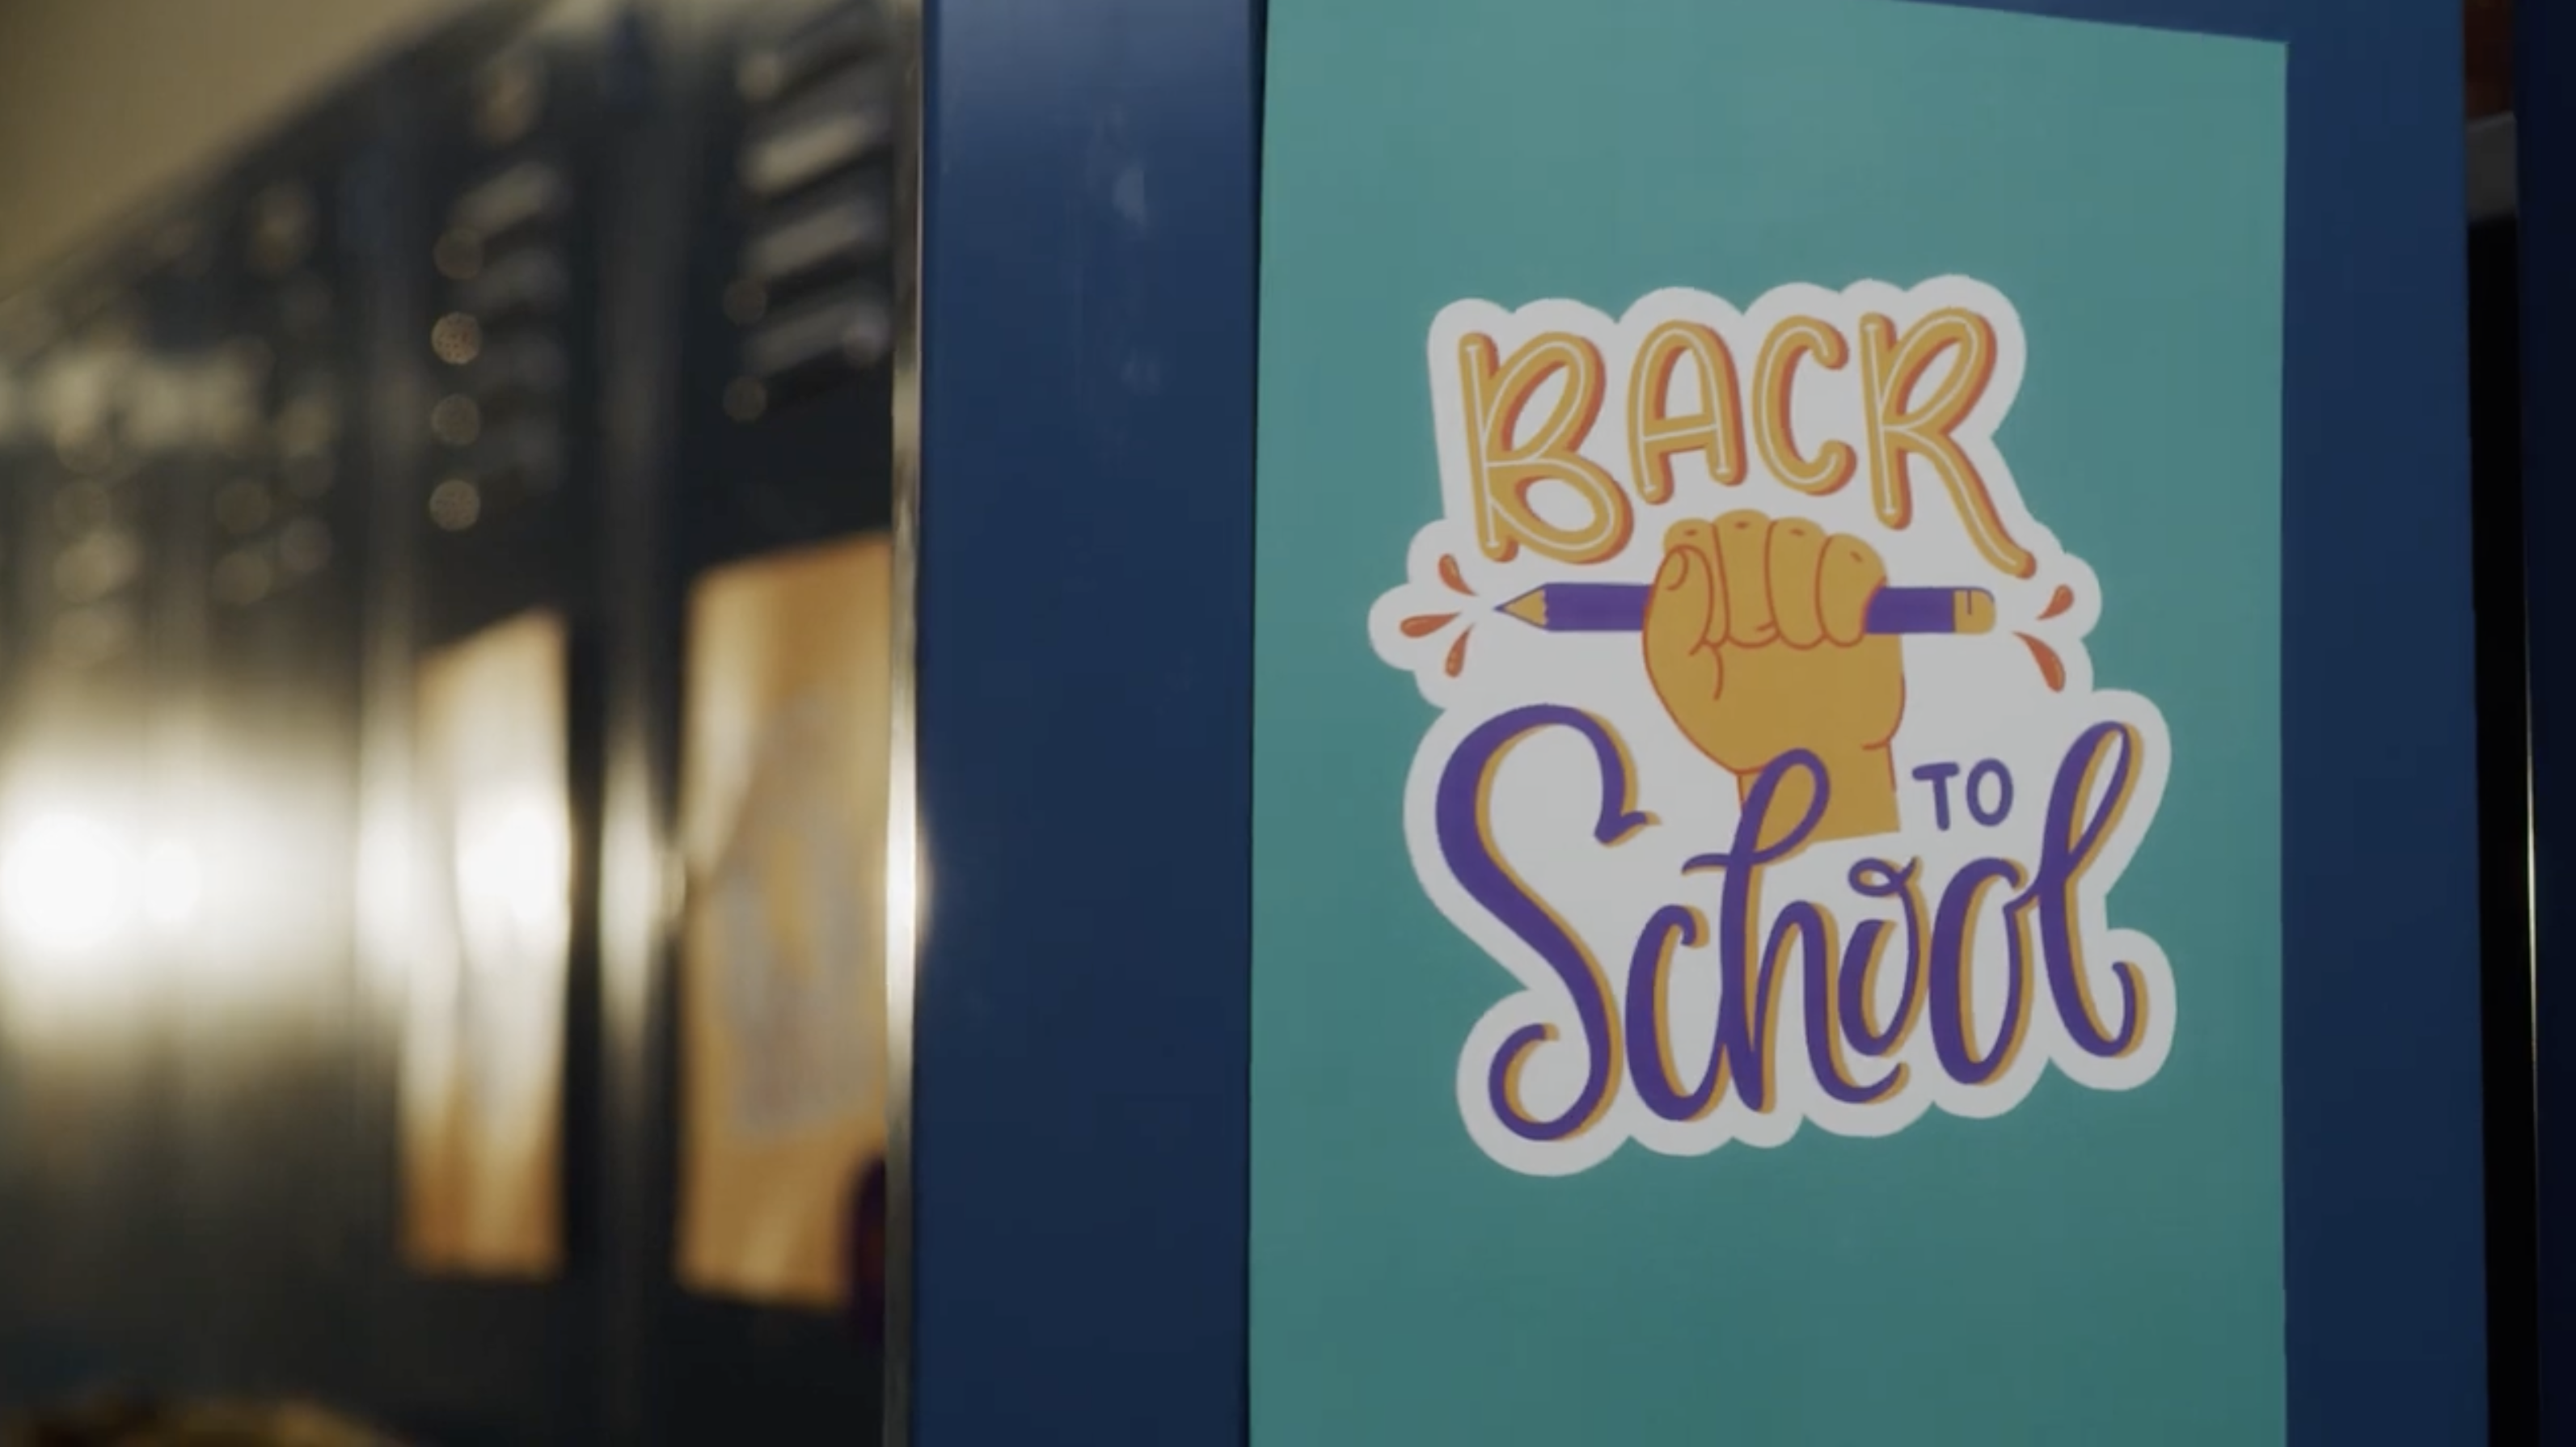 Several school lockers are visible with one in focus, a sign on it reads, "Back to School"